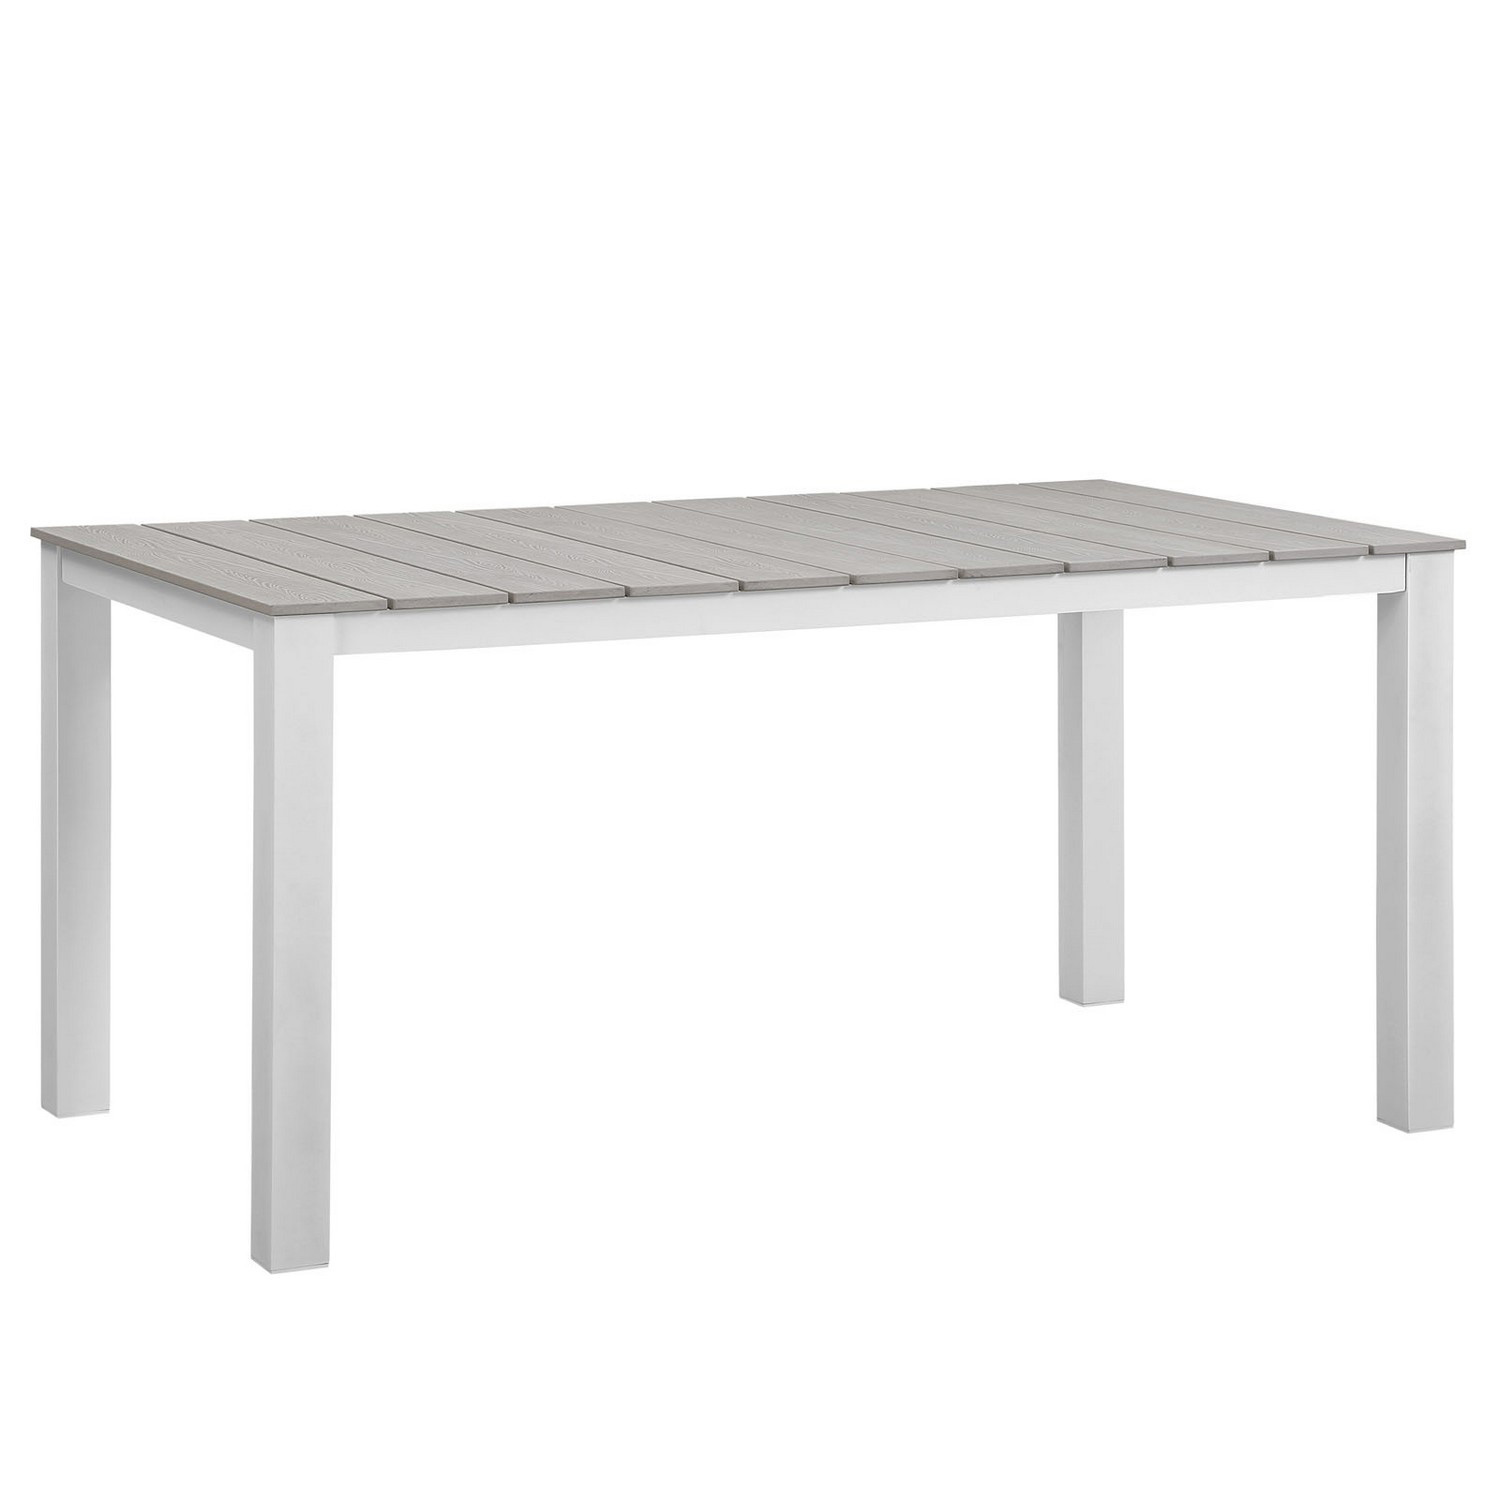 Modway Maine 63 Outdoor Patio Dining Table - White/Light Gray